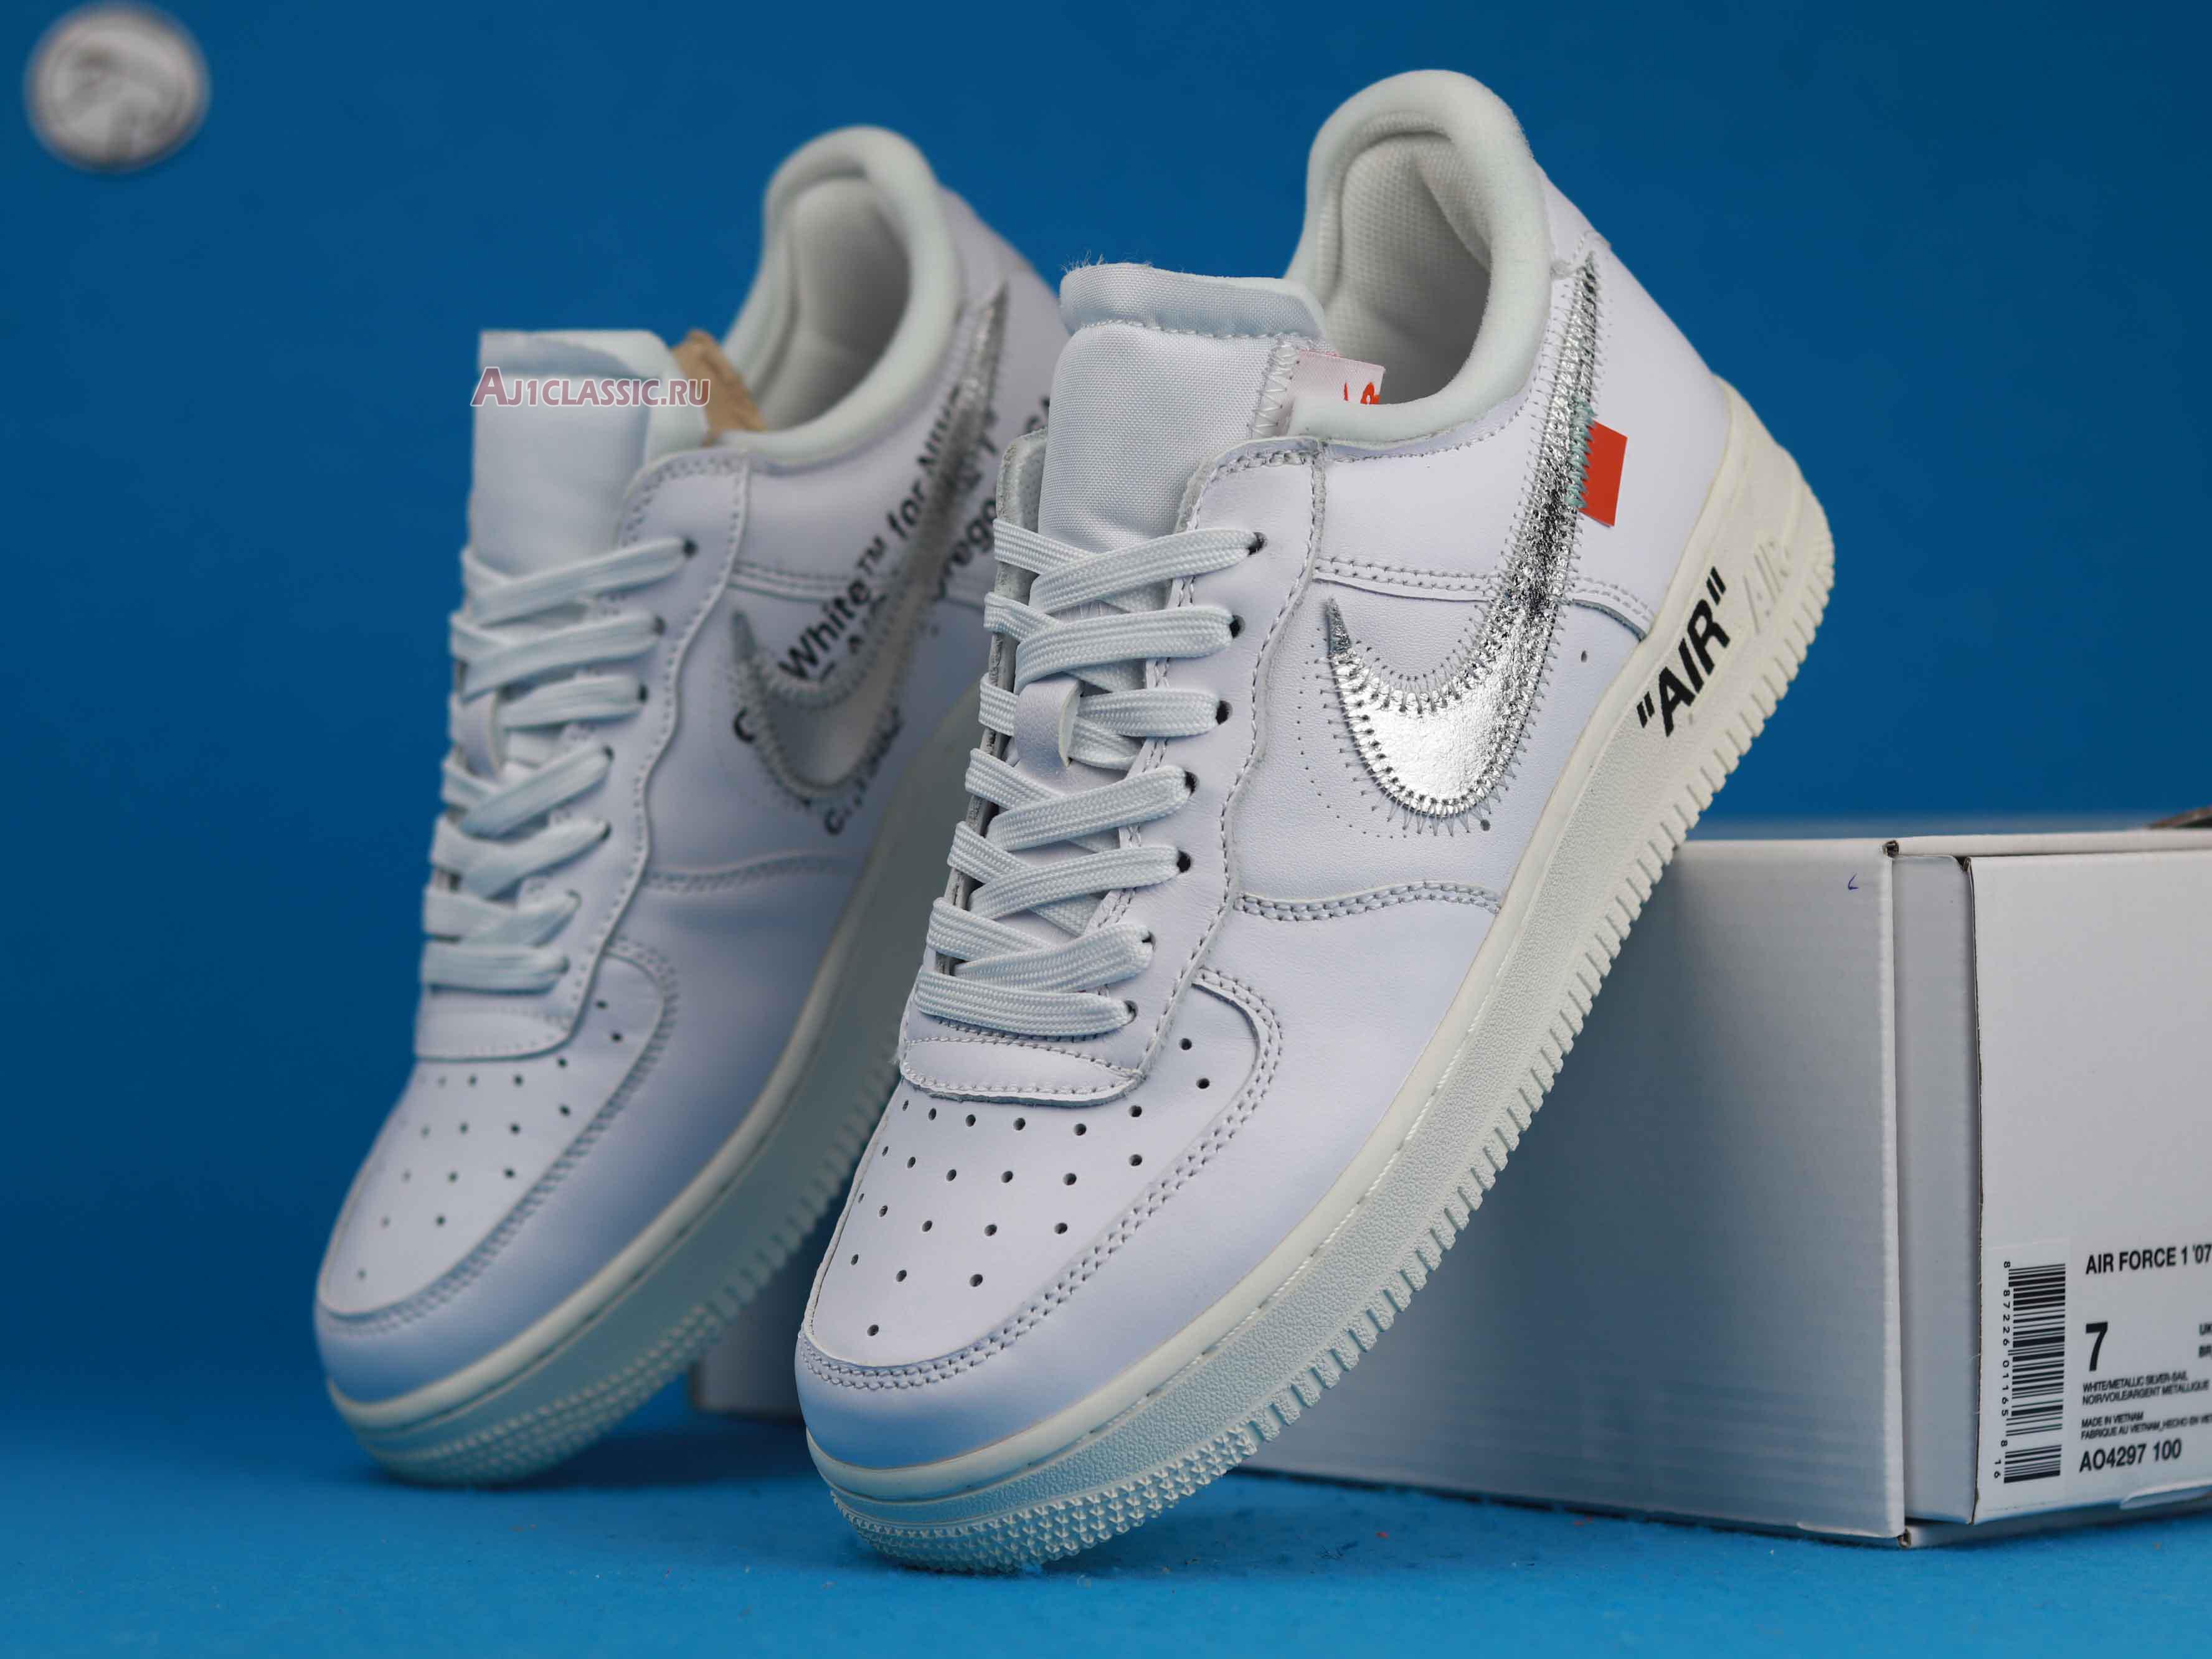 Off-White x Nike Air Force 1 Low ComplexCon Exclusive AO4297-100 White/Metallic Silver-Sail Sneakers